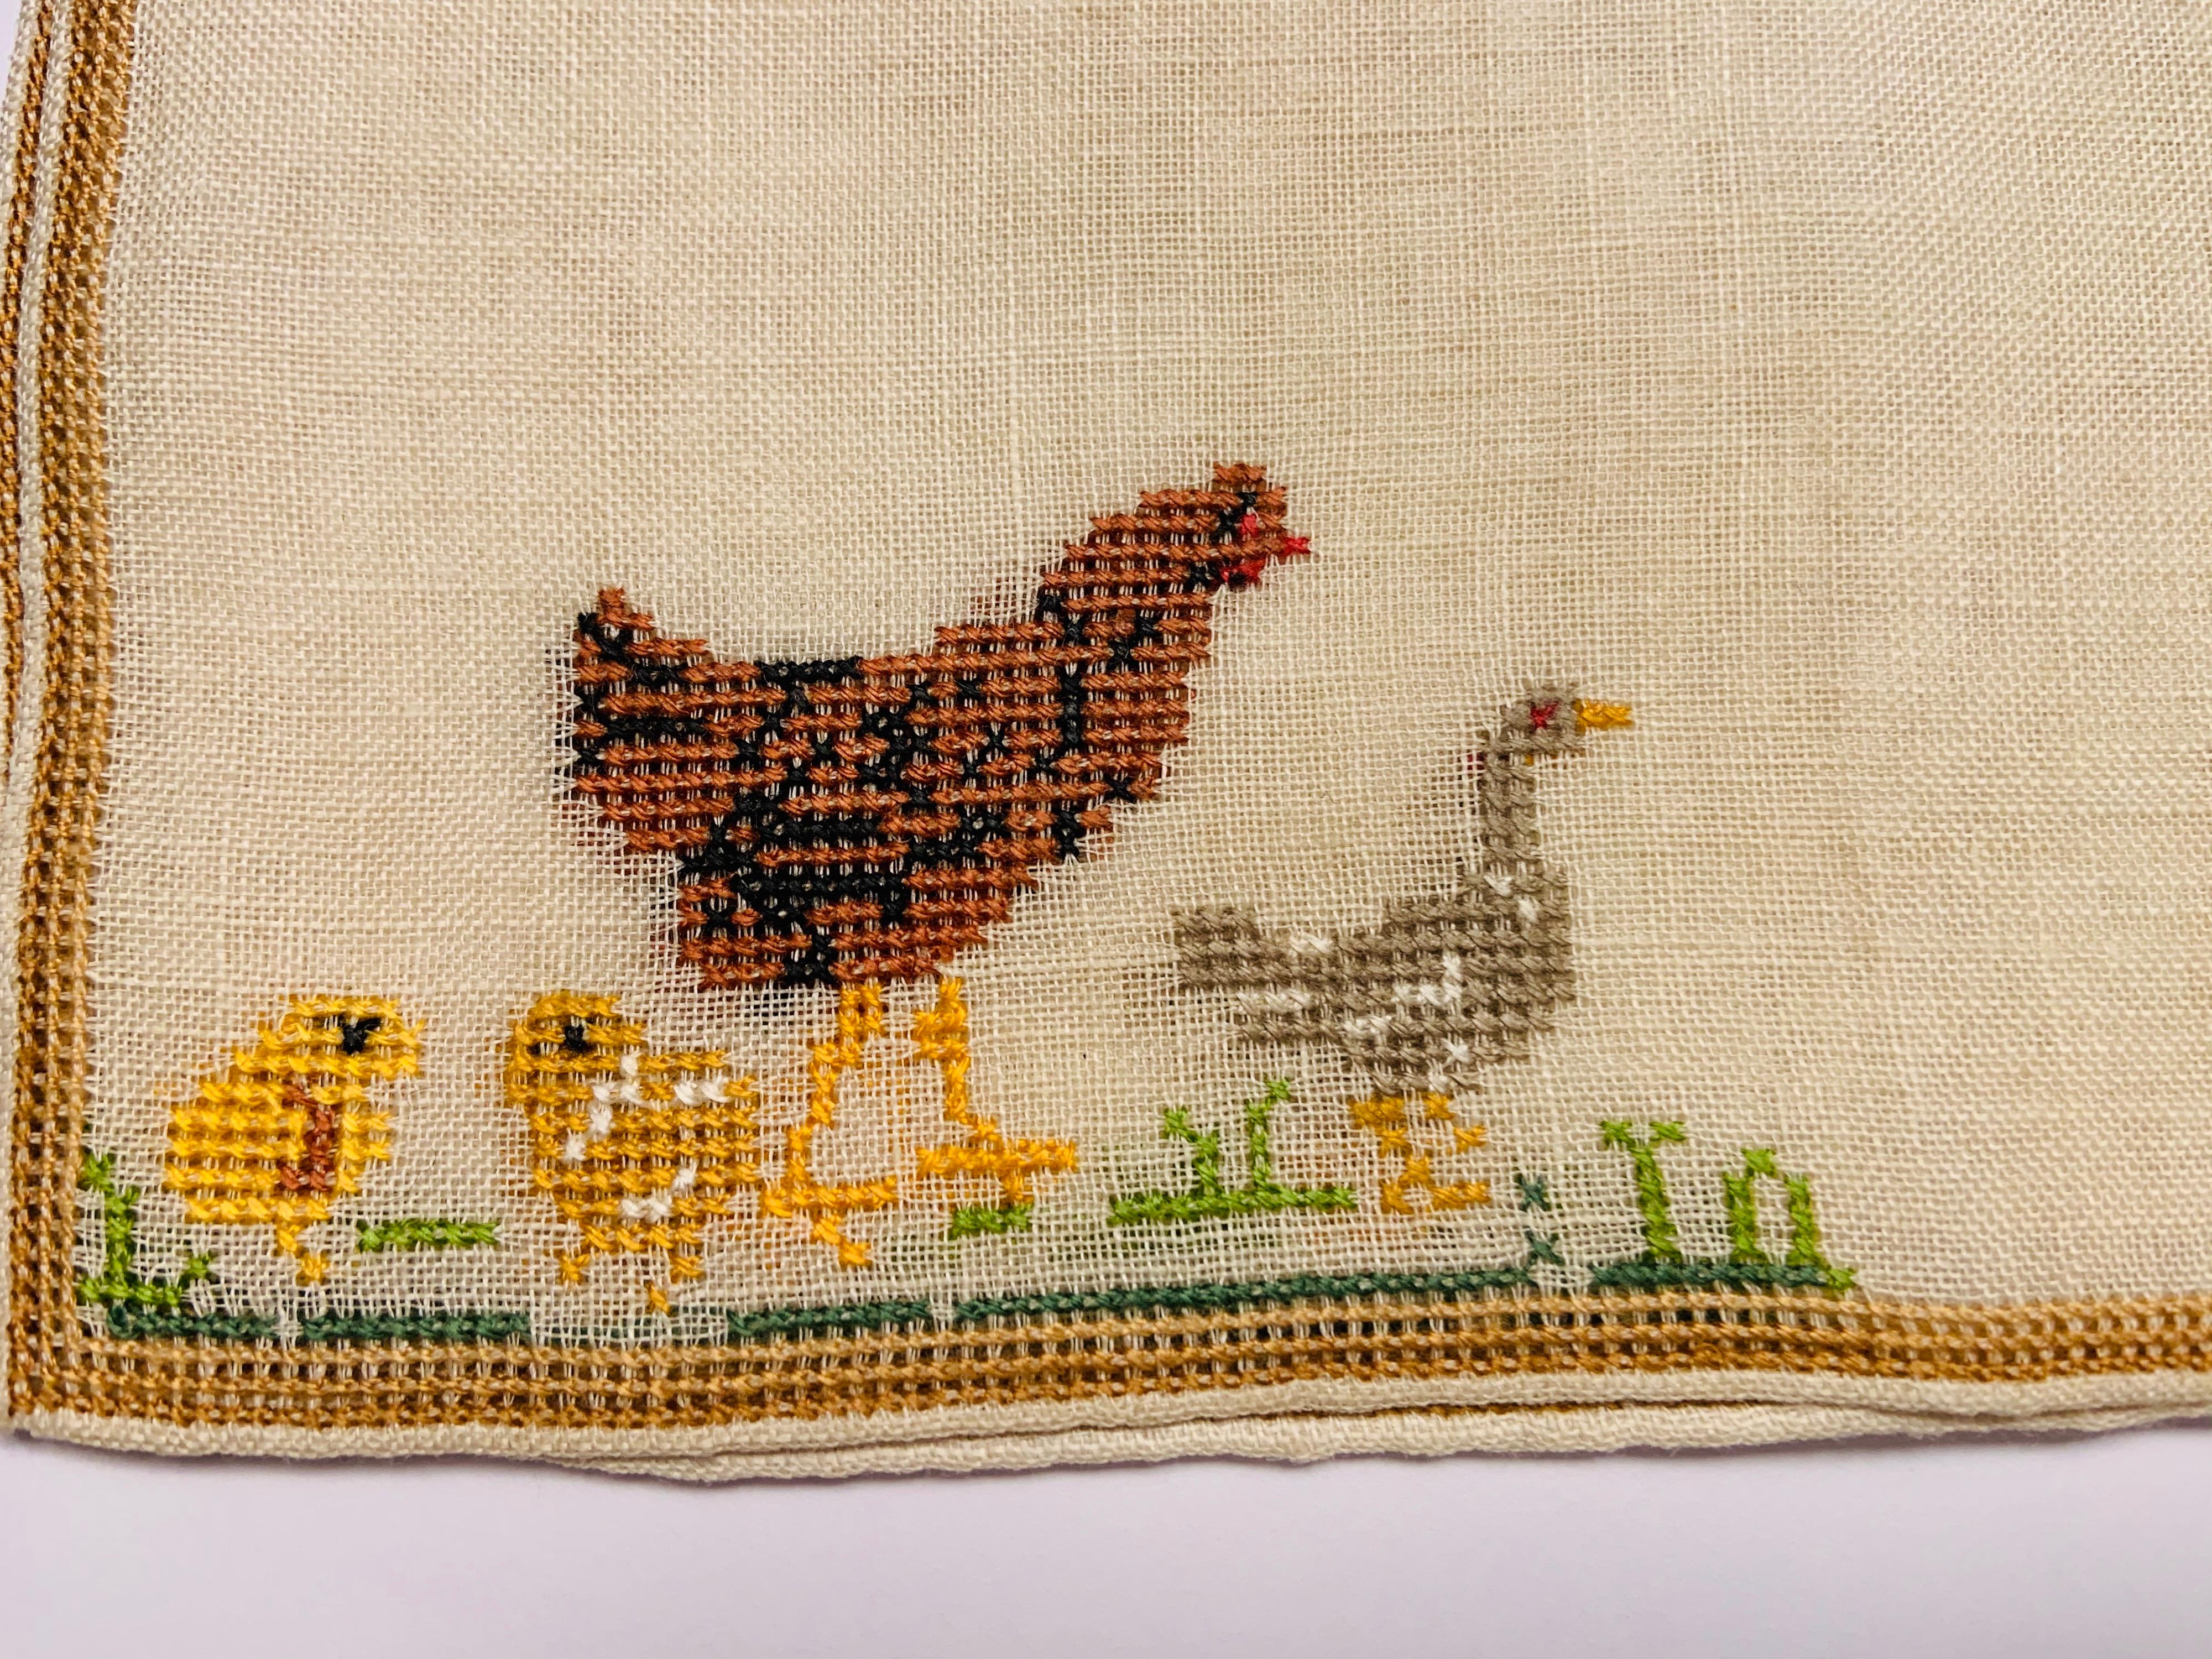 These cocktail napkins are an unusual design for the Rooster, the party animal or mascot of Cocktail napkins, seen here with his family. Three are the entire family and three are just the chicks. They are hand done on a natural linen background and